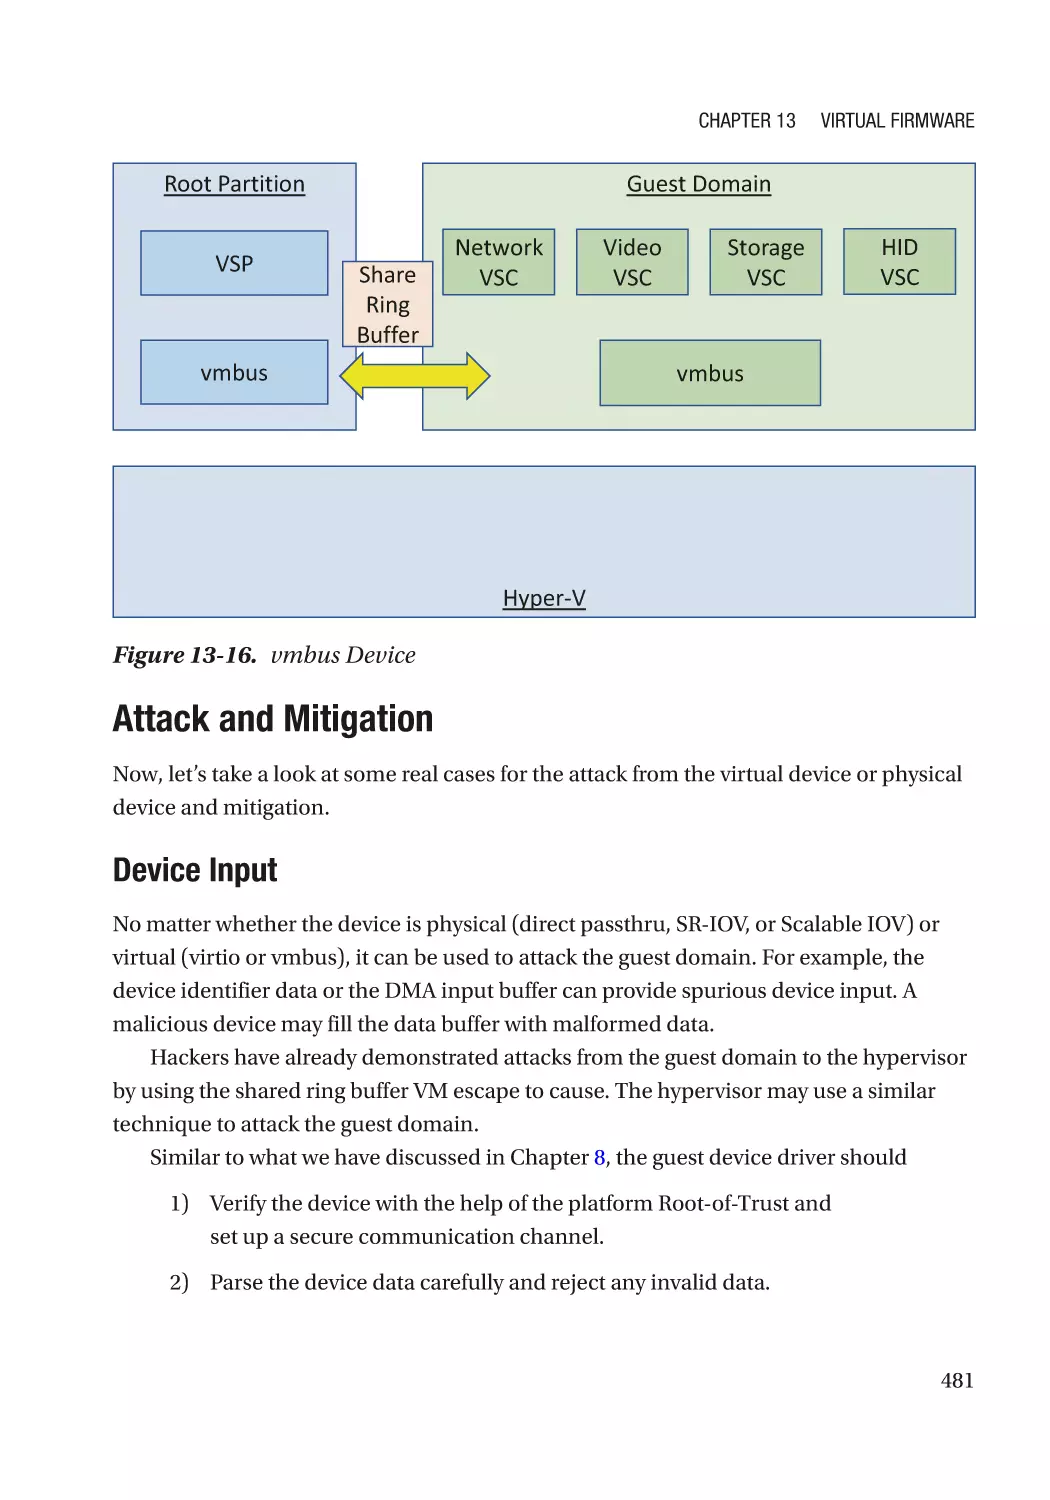 Attack and Mitigation
Device Input